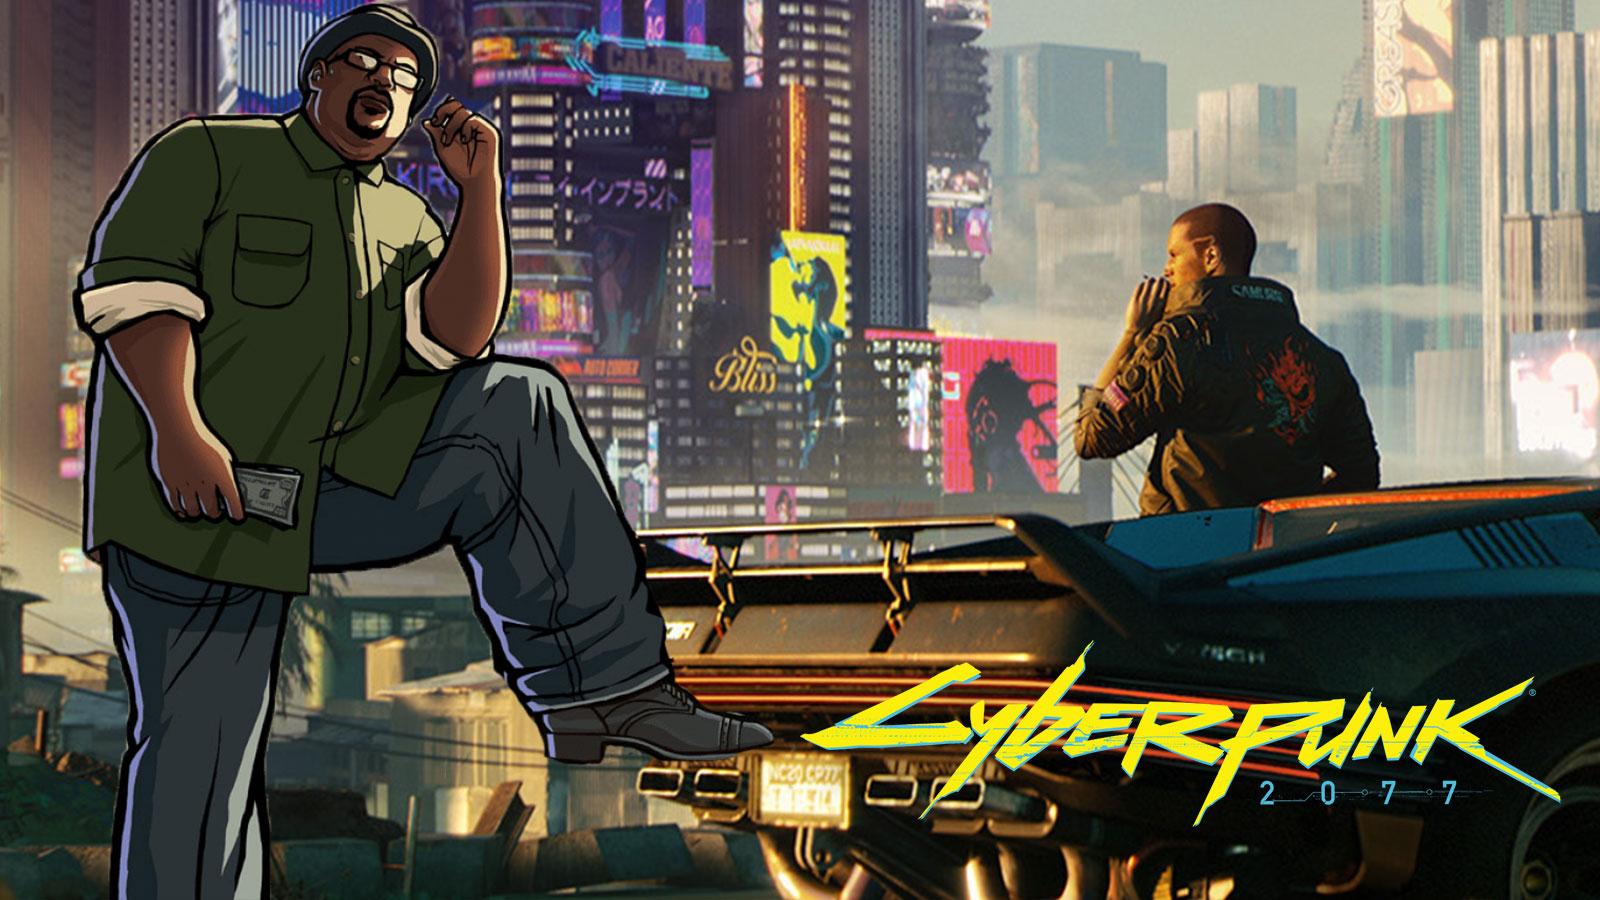 How To Find Every Easter Egg In Cyberpunk 2077